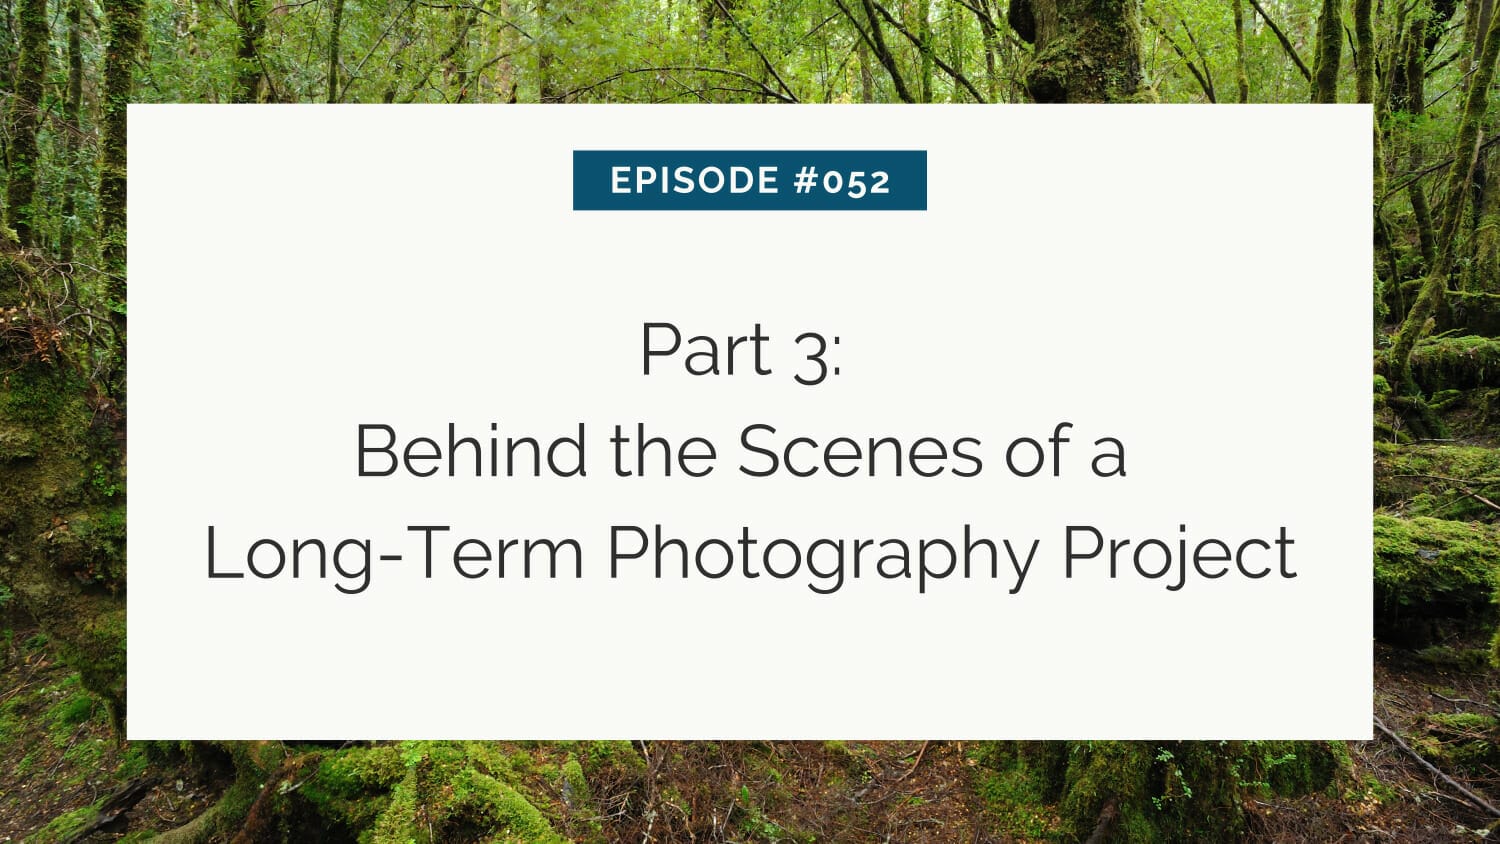 Slide from a presentation detailing episode #052: part 3: behind the scenes of a long-term photography project, set against a backdrop of a lush forest.